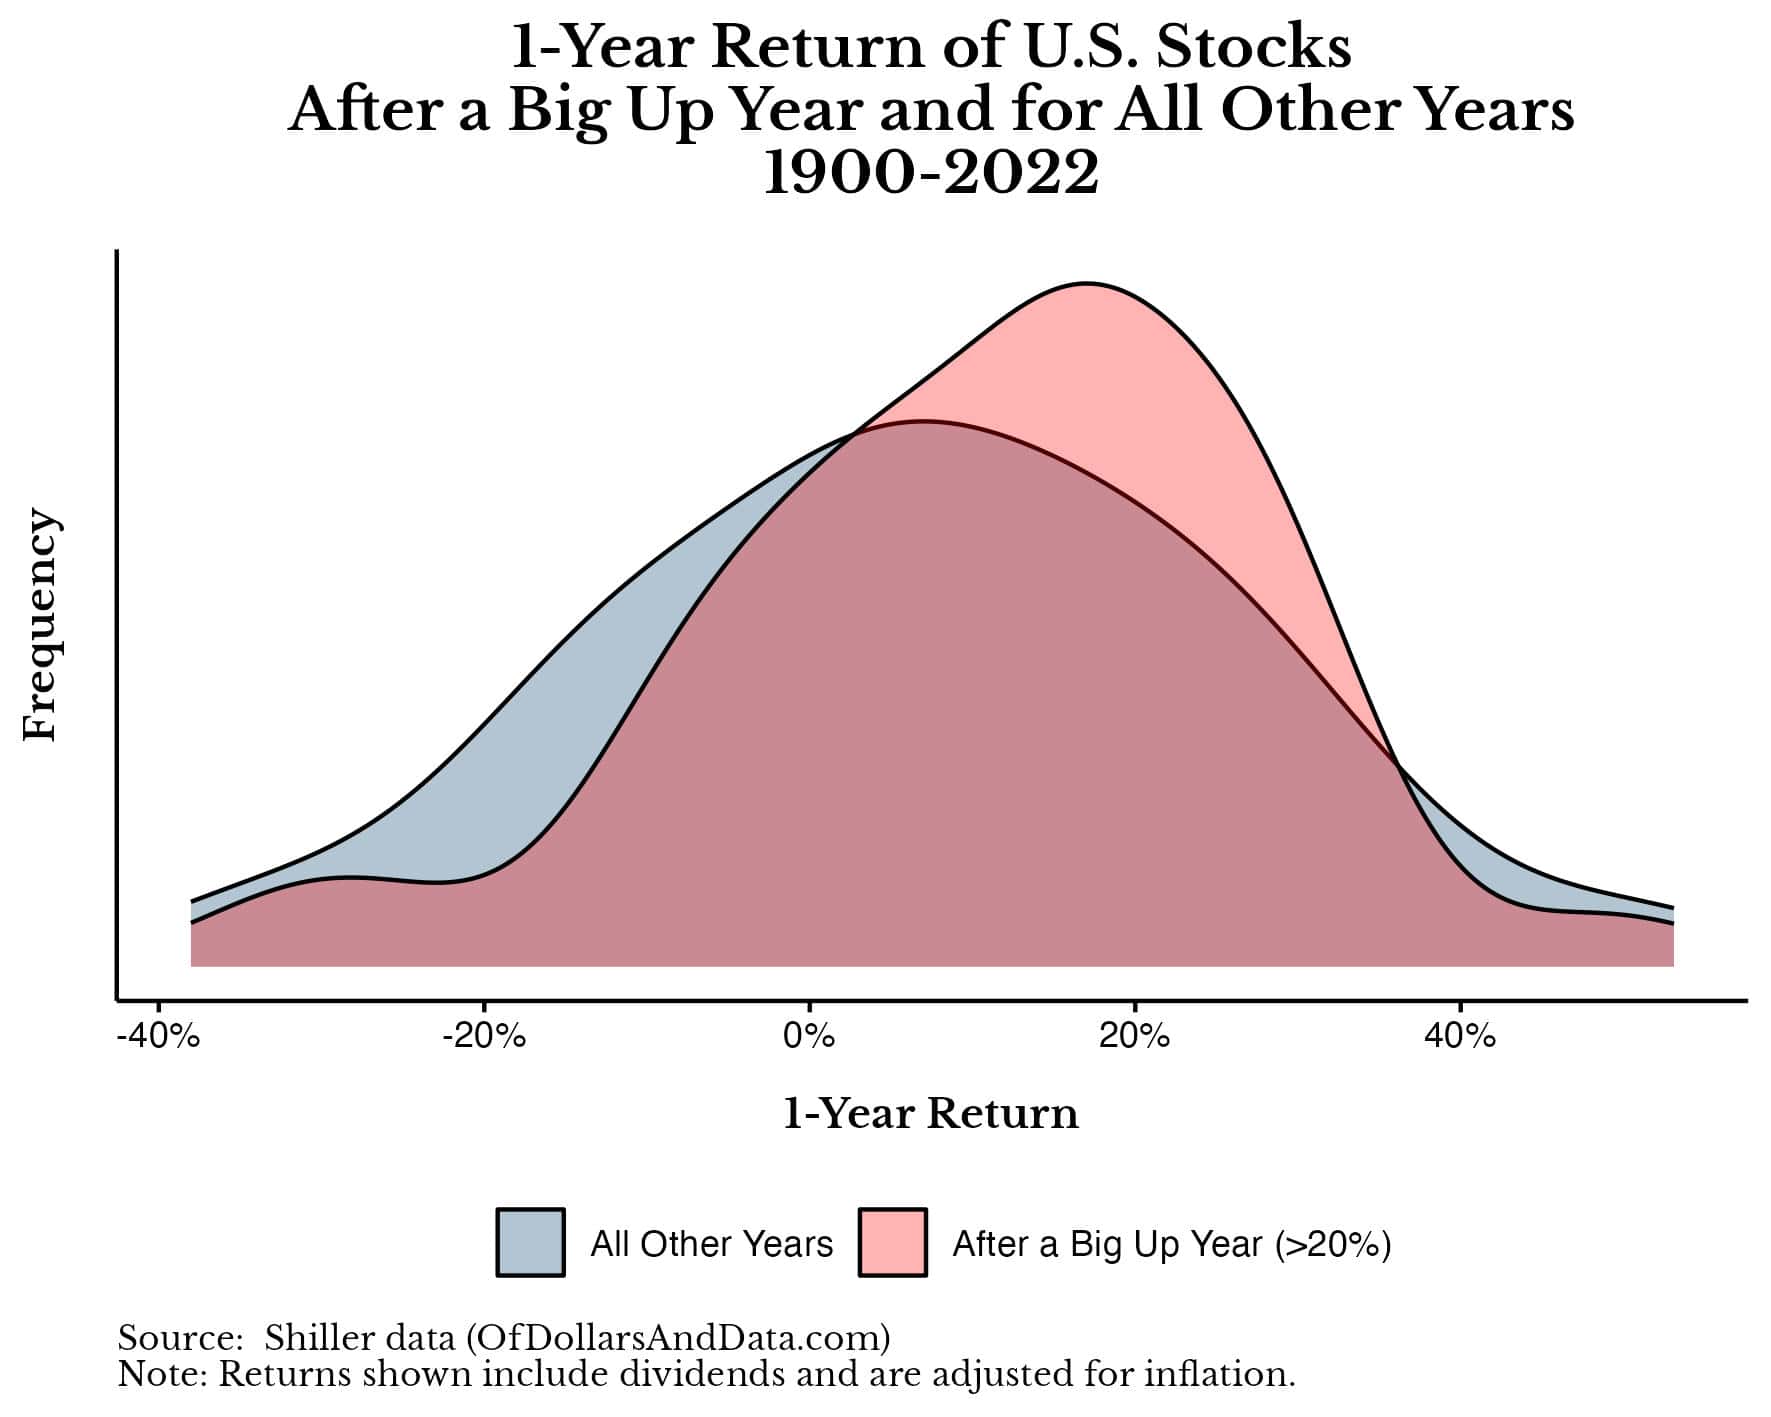 US stock returns after a big up year and in all other years from 1900-2022.